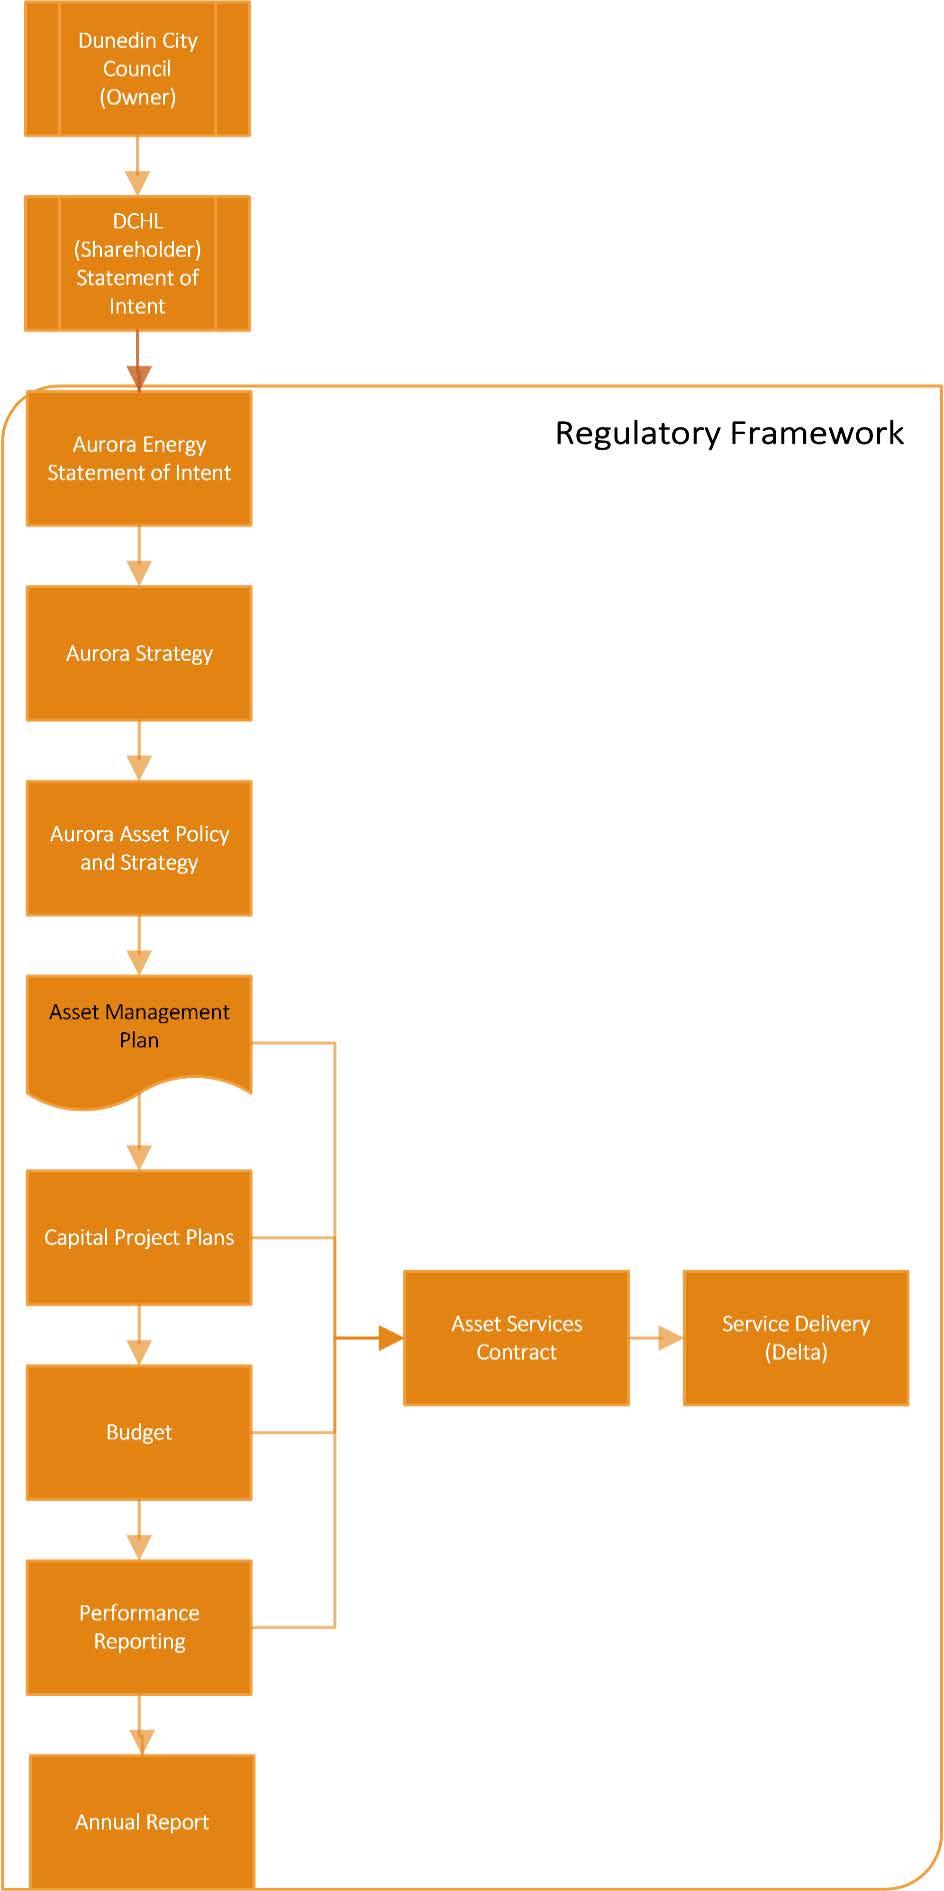 Figure 2-1 Illustrates the cascade from Aurora Energy s Statement of Intent through to the Annual Report and provides context for how the different